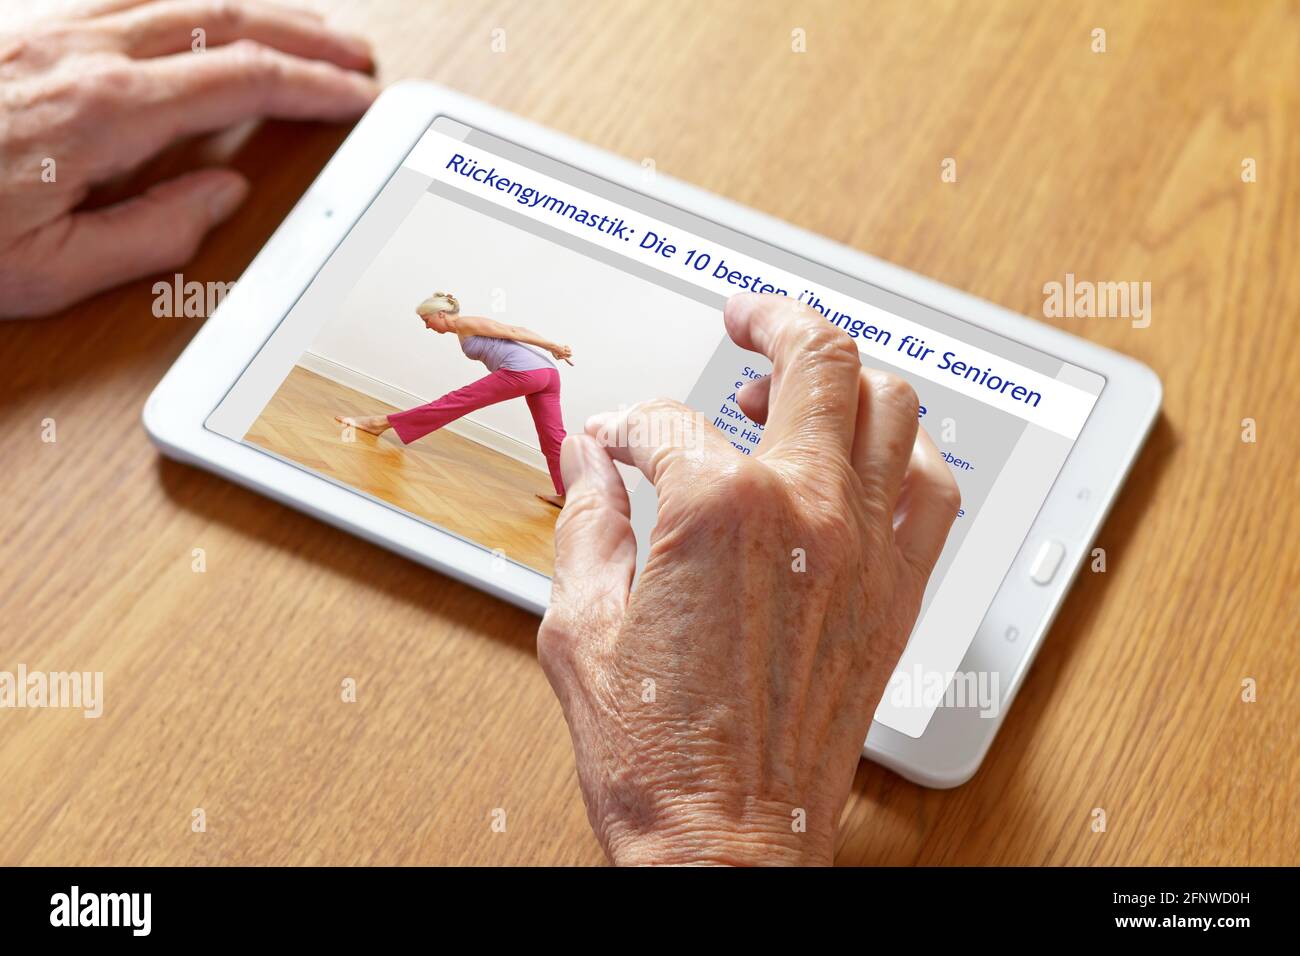 Hands of a senior woman zooming in on german instructions on a tablet pc, text translation: the 10 best back exercises for seniors. Stock Photo